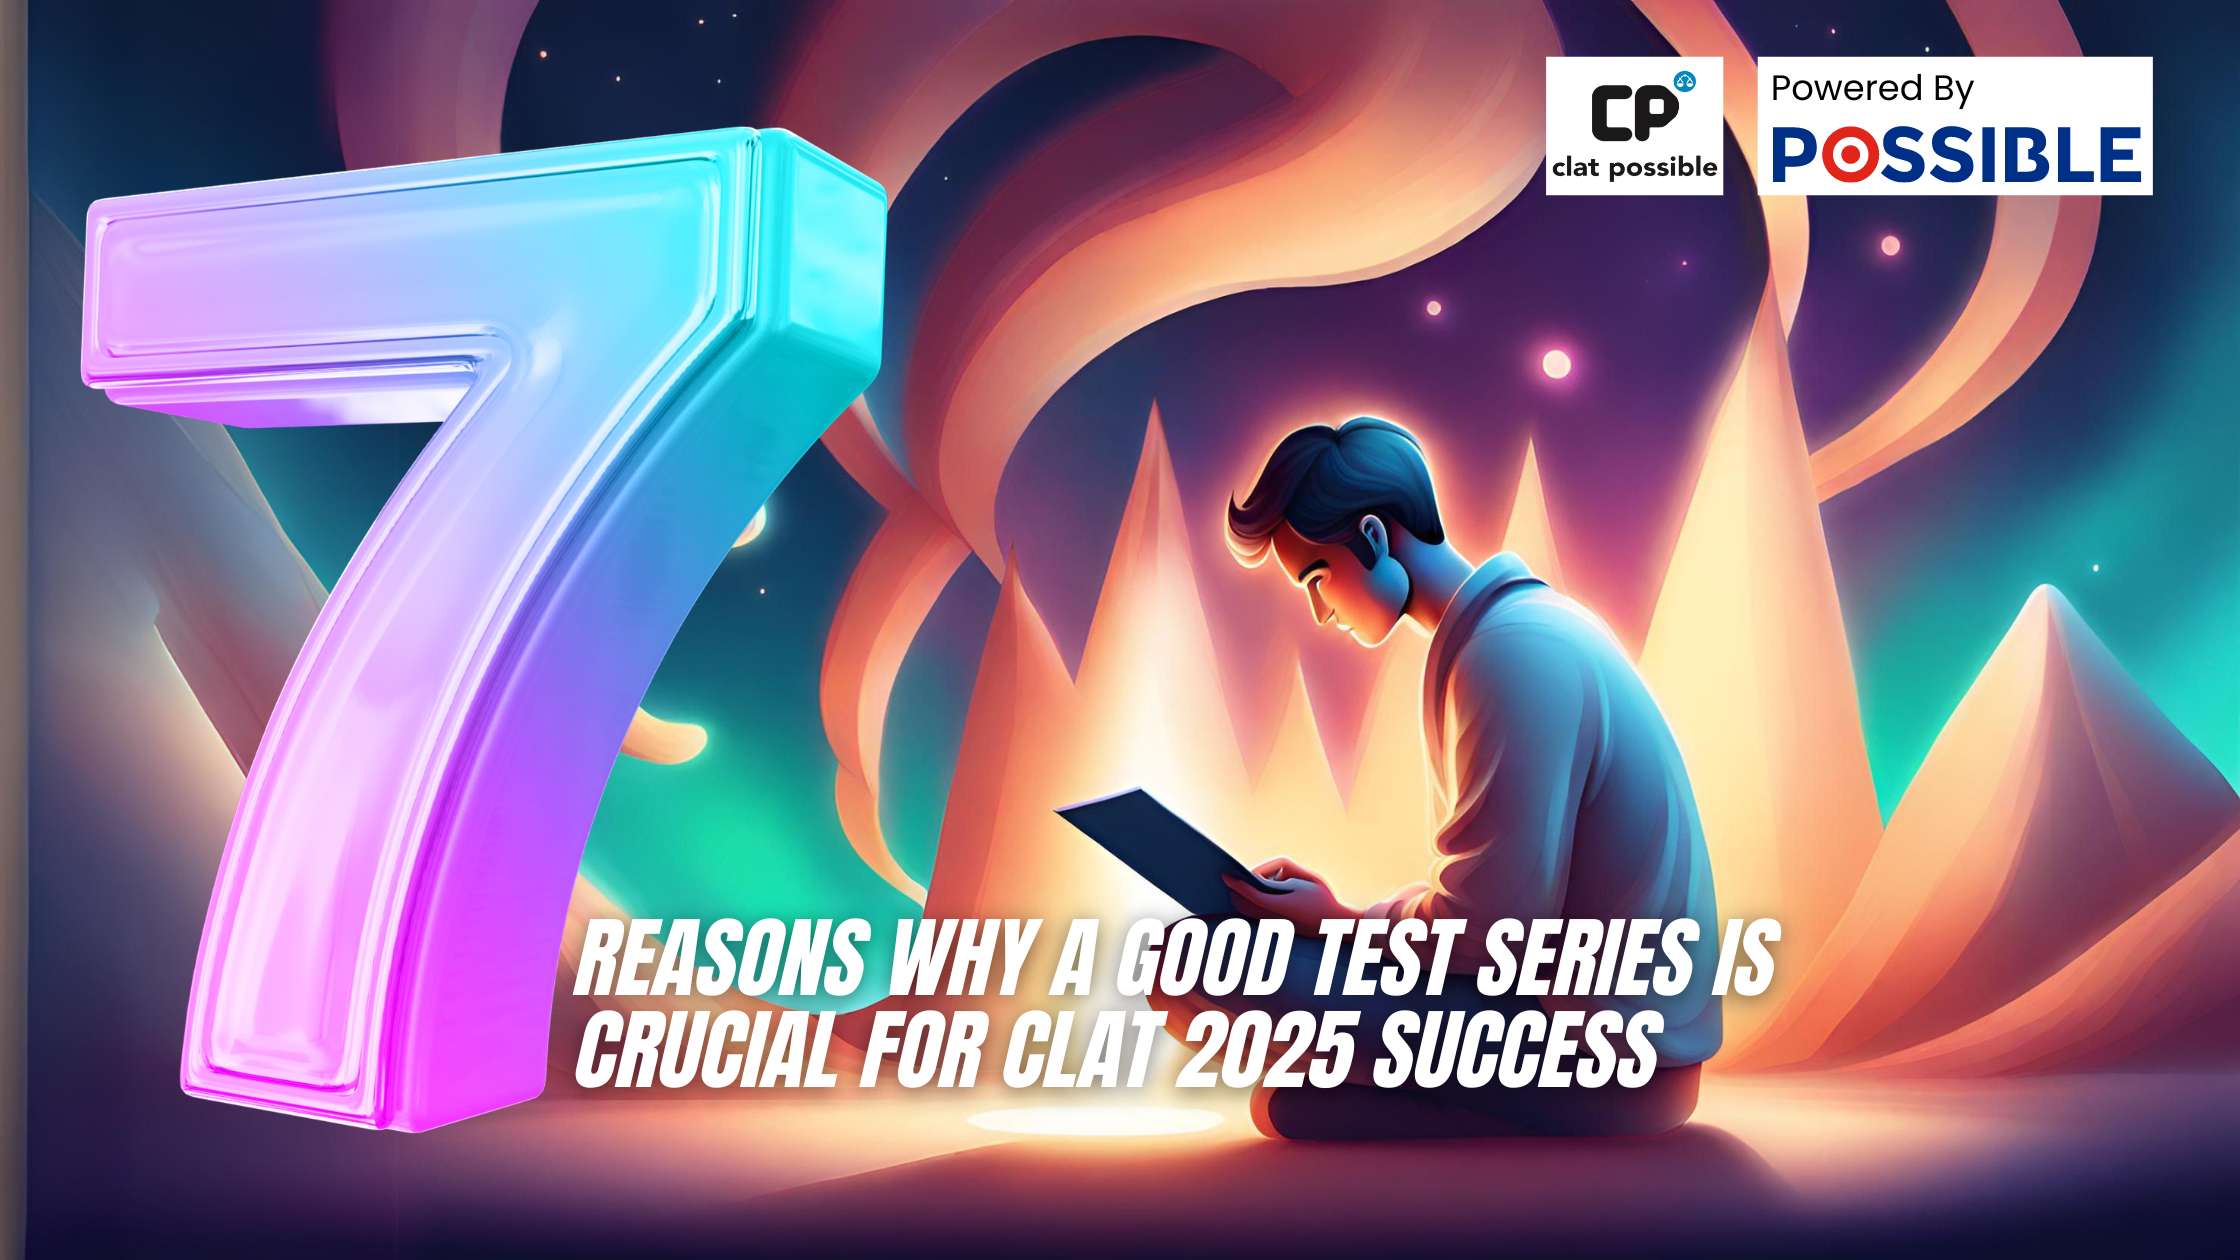 Test Series for CLAT 2025 